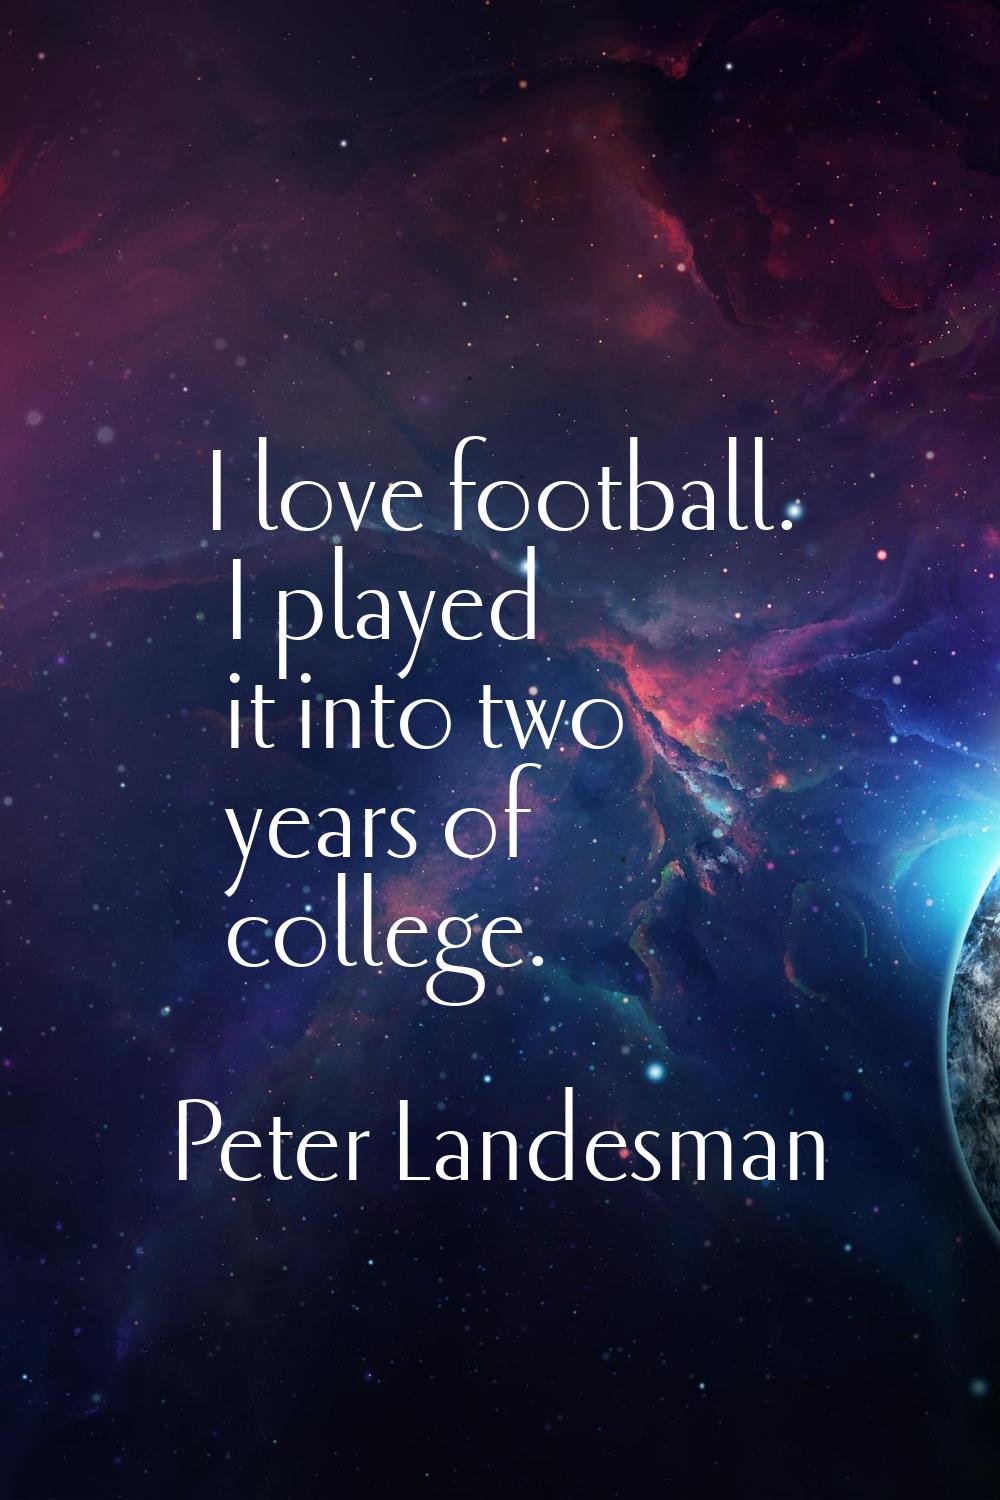 I love football. I played it into two years of college.